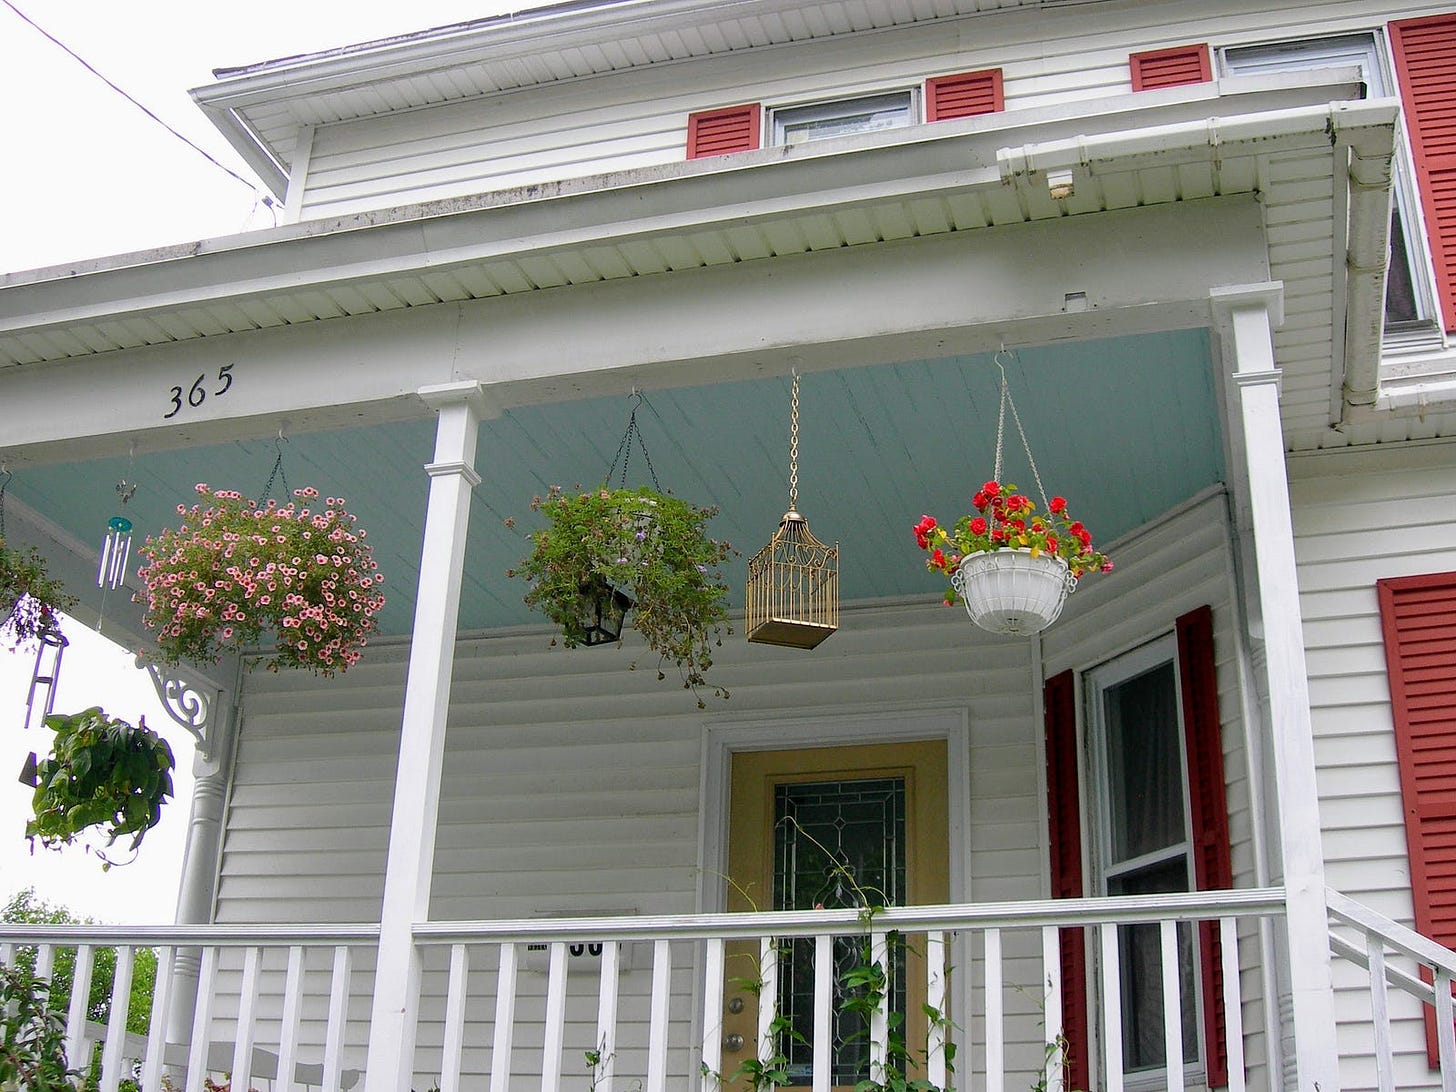 A porch with haint blue painted ceilings.